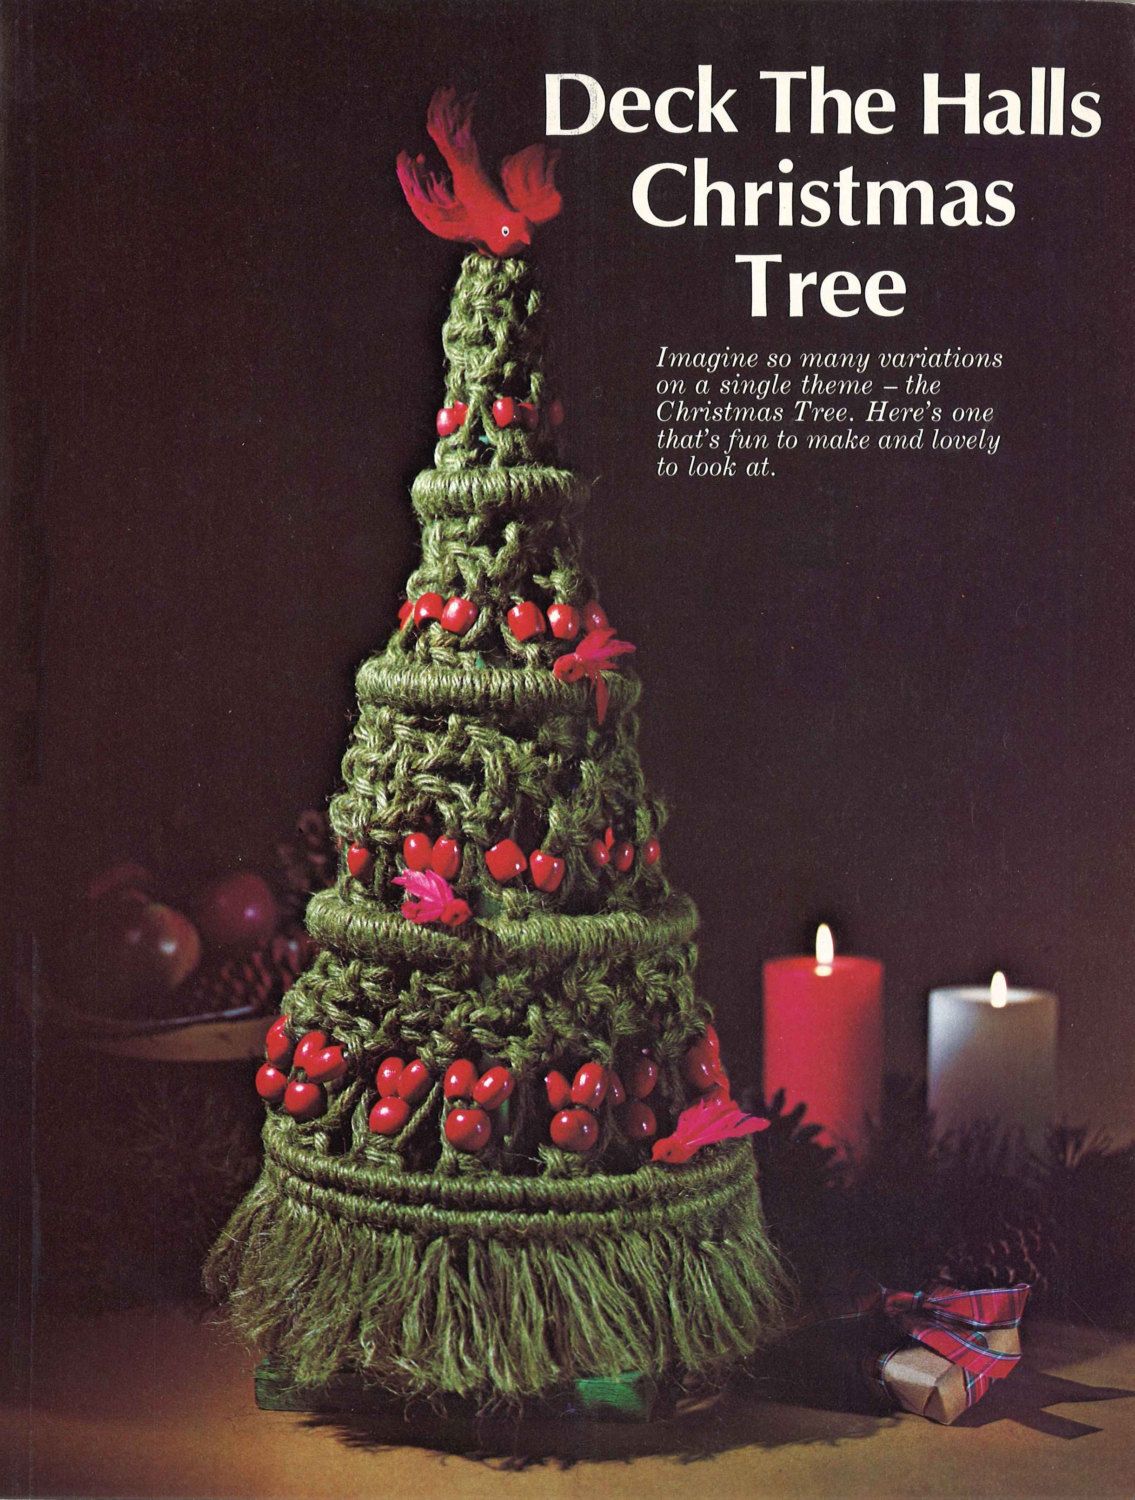 70s macrame christmas - Deck The Halls Christmas Tree Imagine so many variations on a single theme the Christmas Tree. Here's one that's fun to make and lovely to look at. W20884